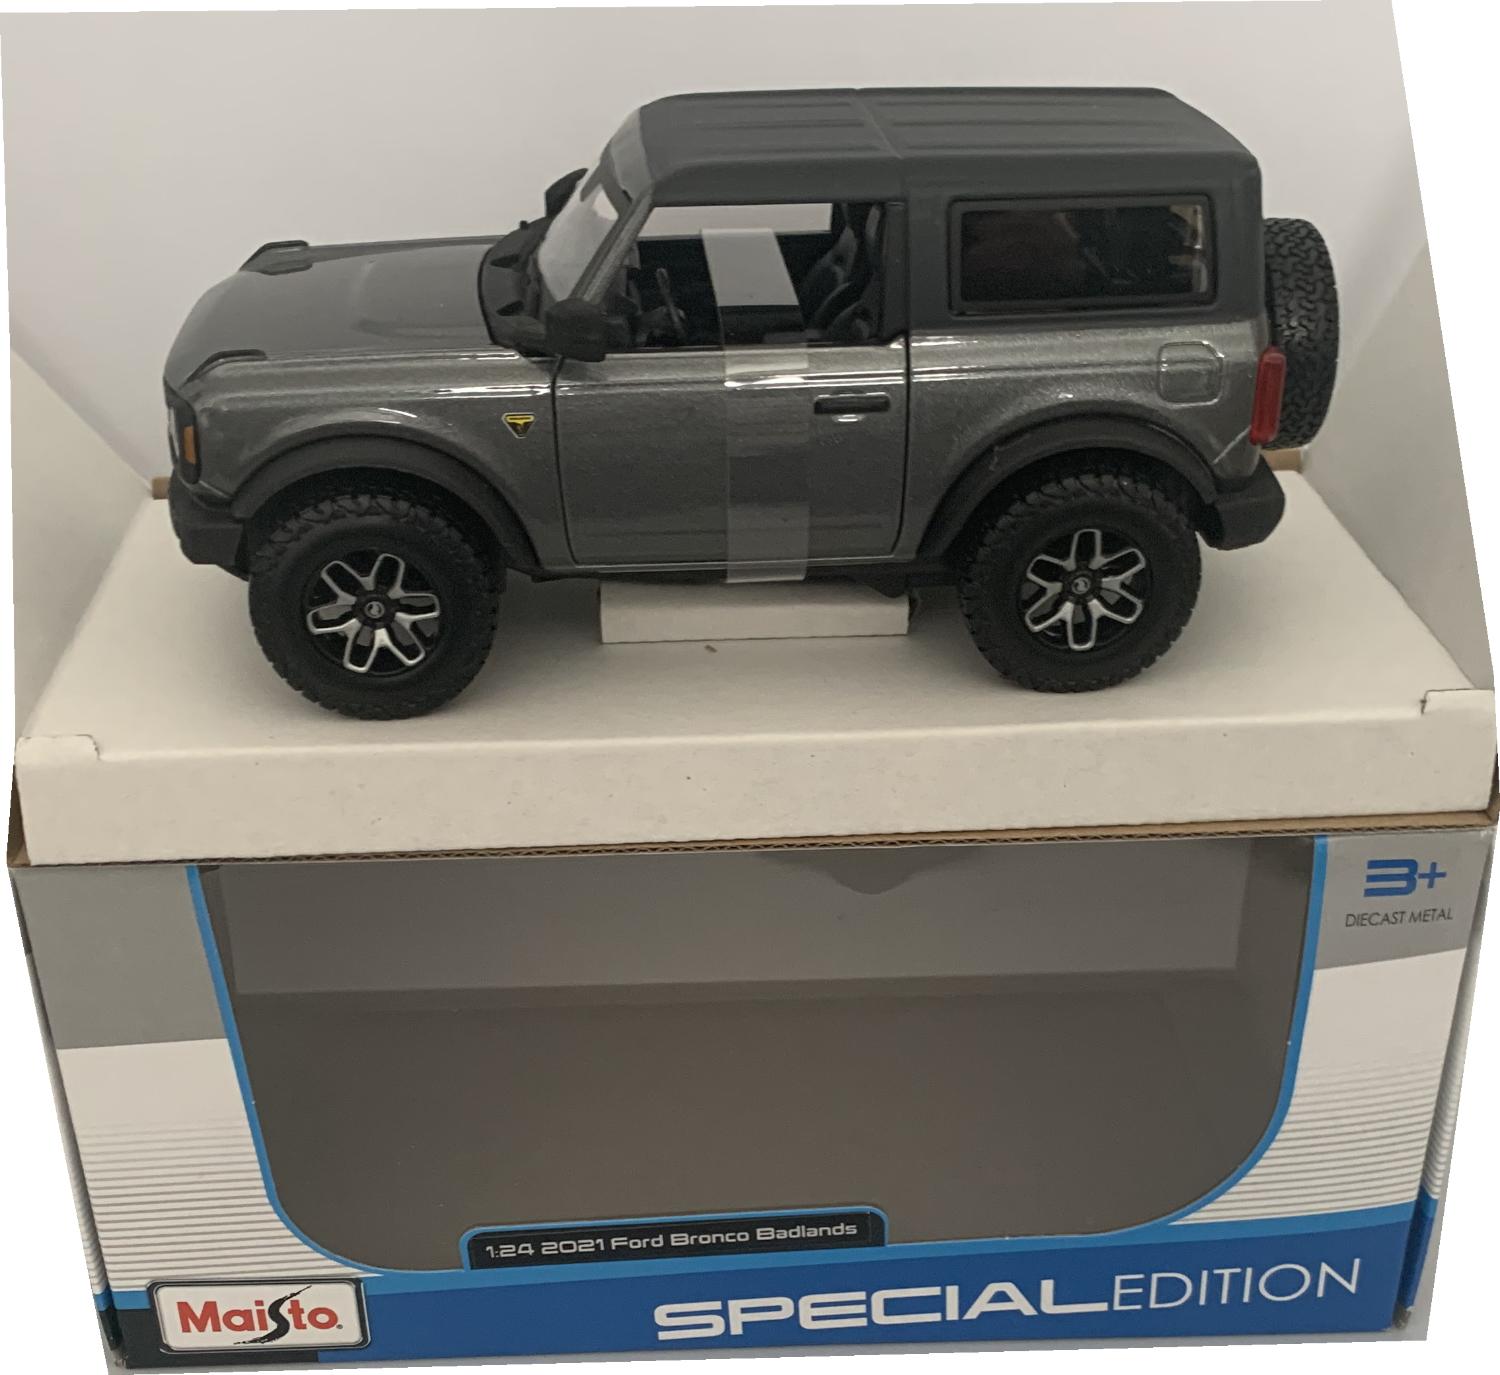 Ford Bronco Badlands 2021 in grey 1:24 scale model from Maisto,   the car is approx. 18 cm long and the presentation box is 23 cm long